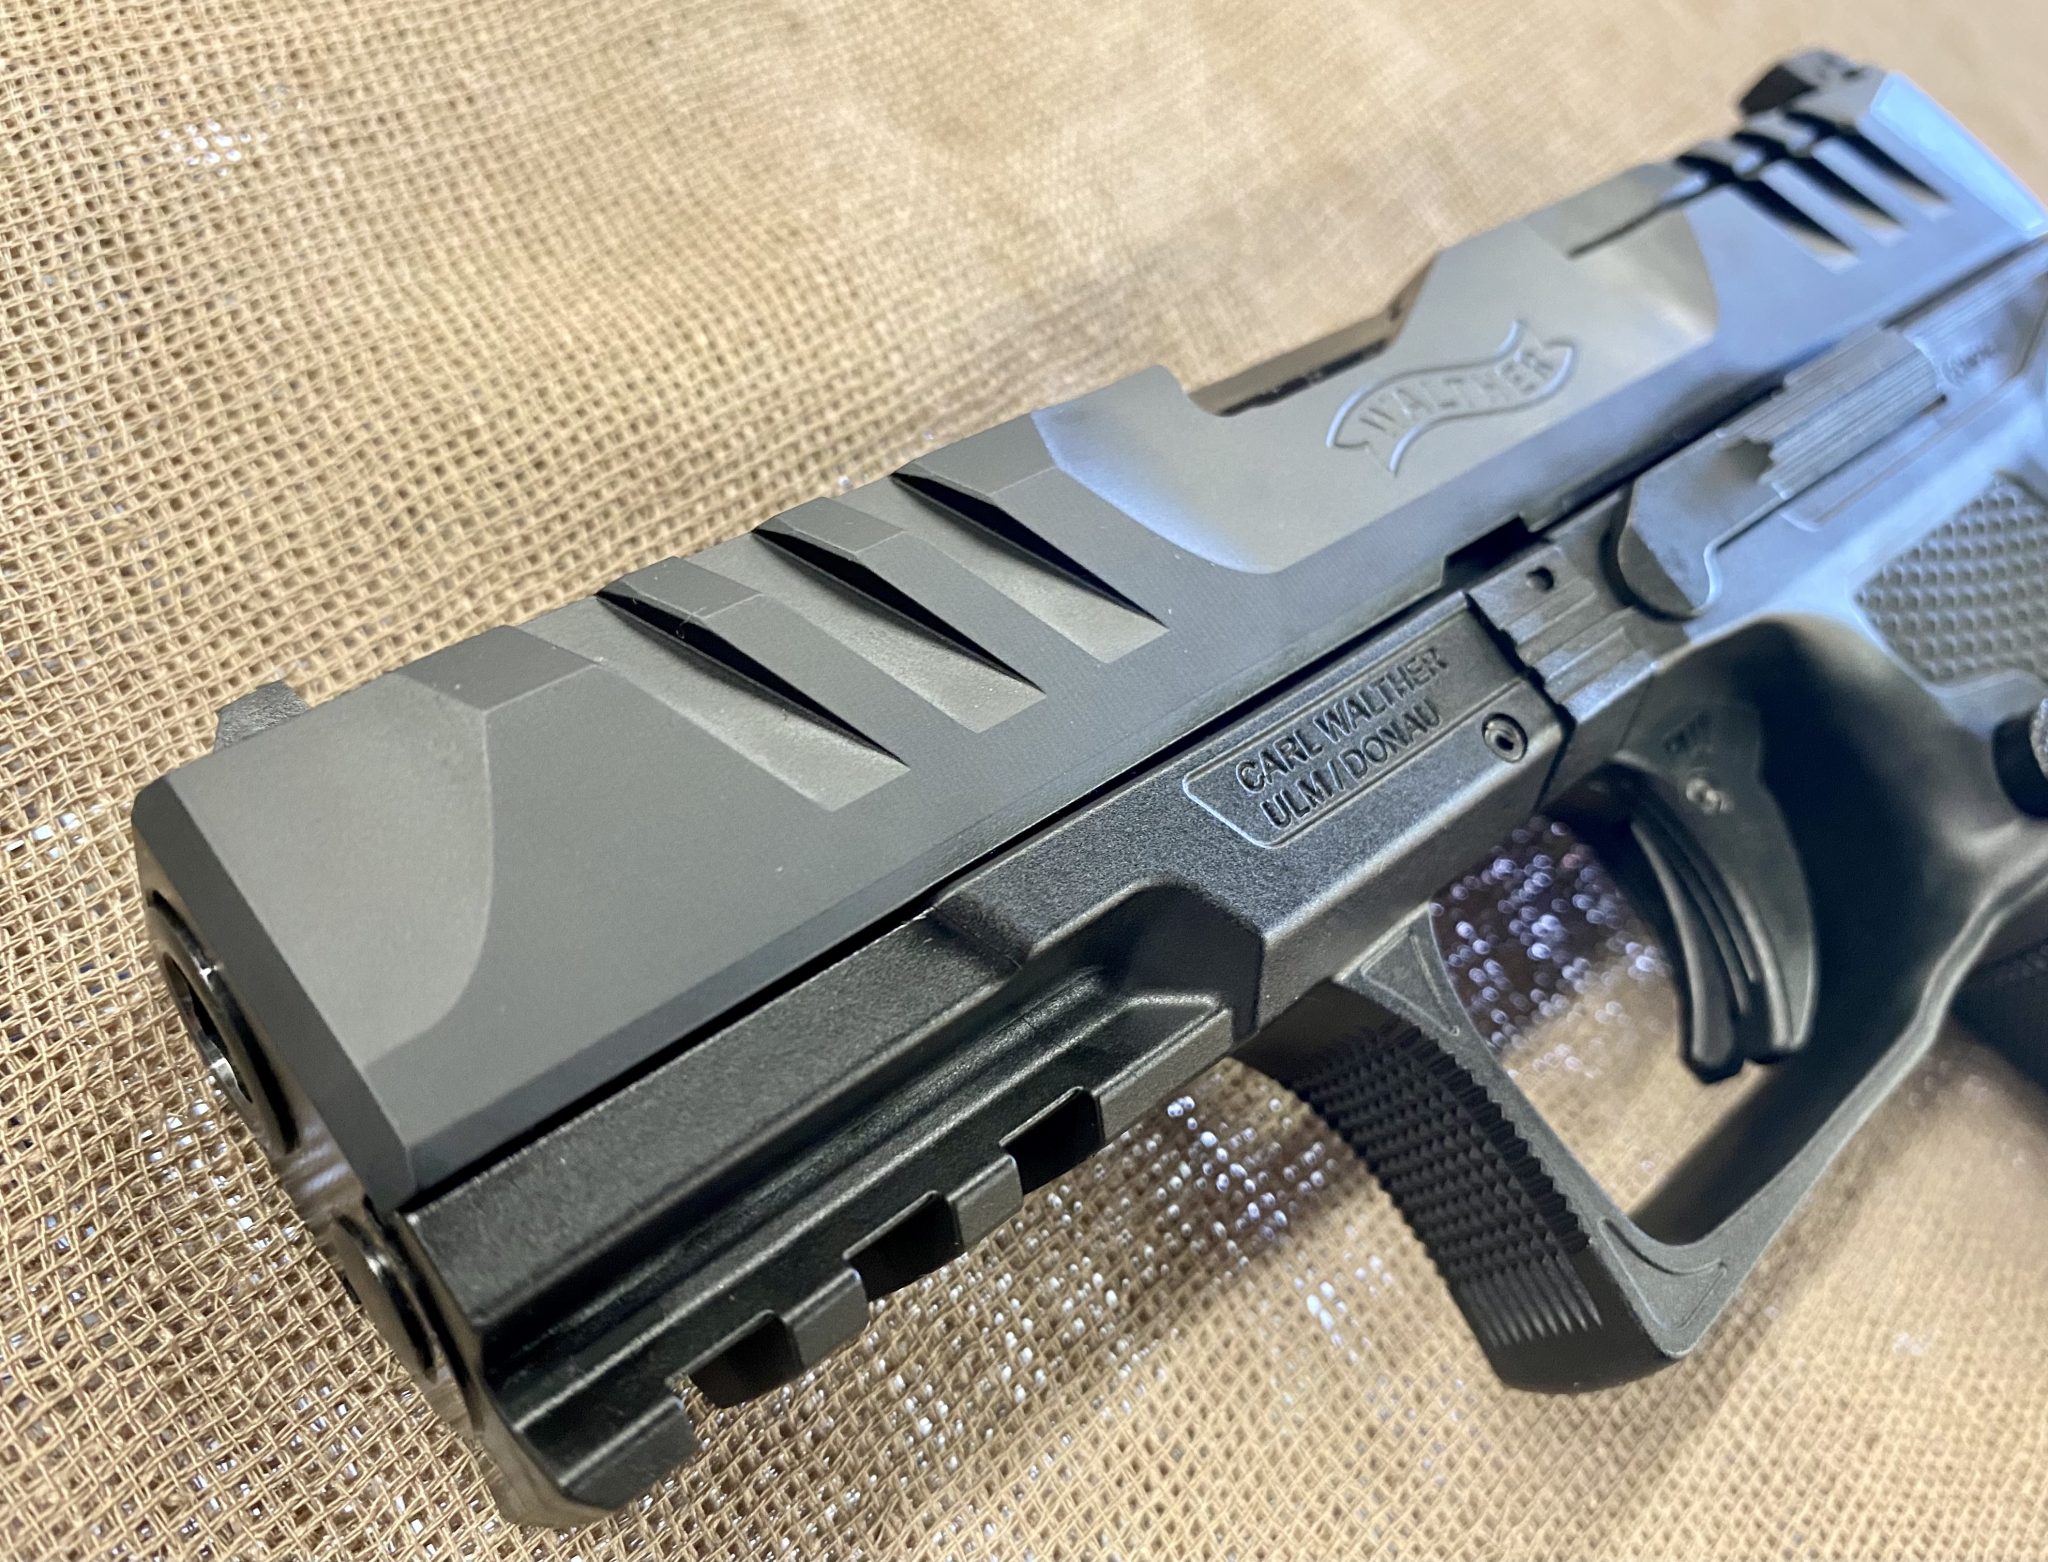 walther pdp compact 9mm for sale